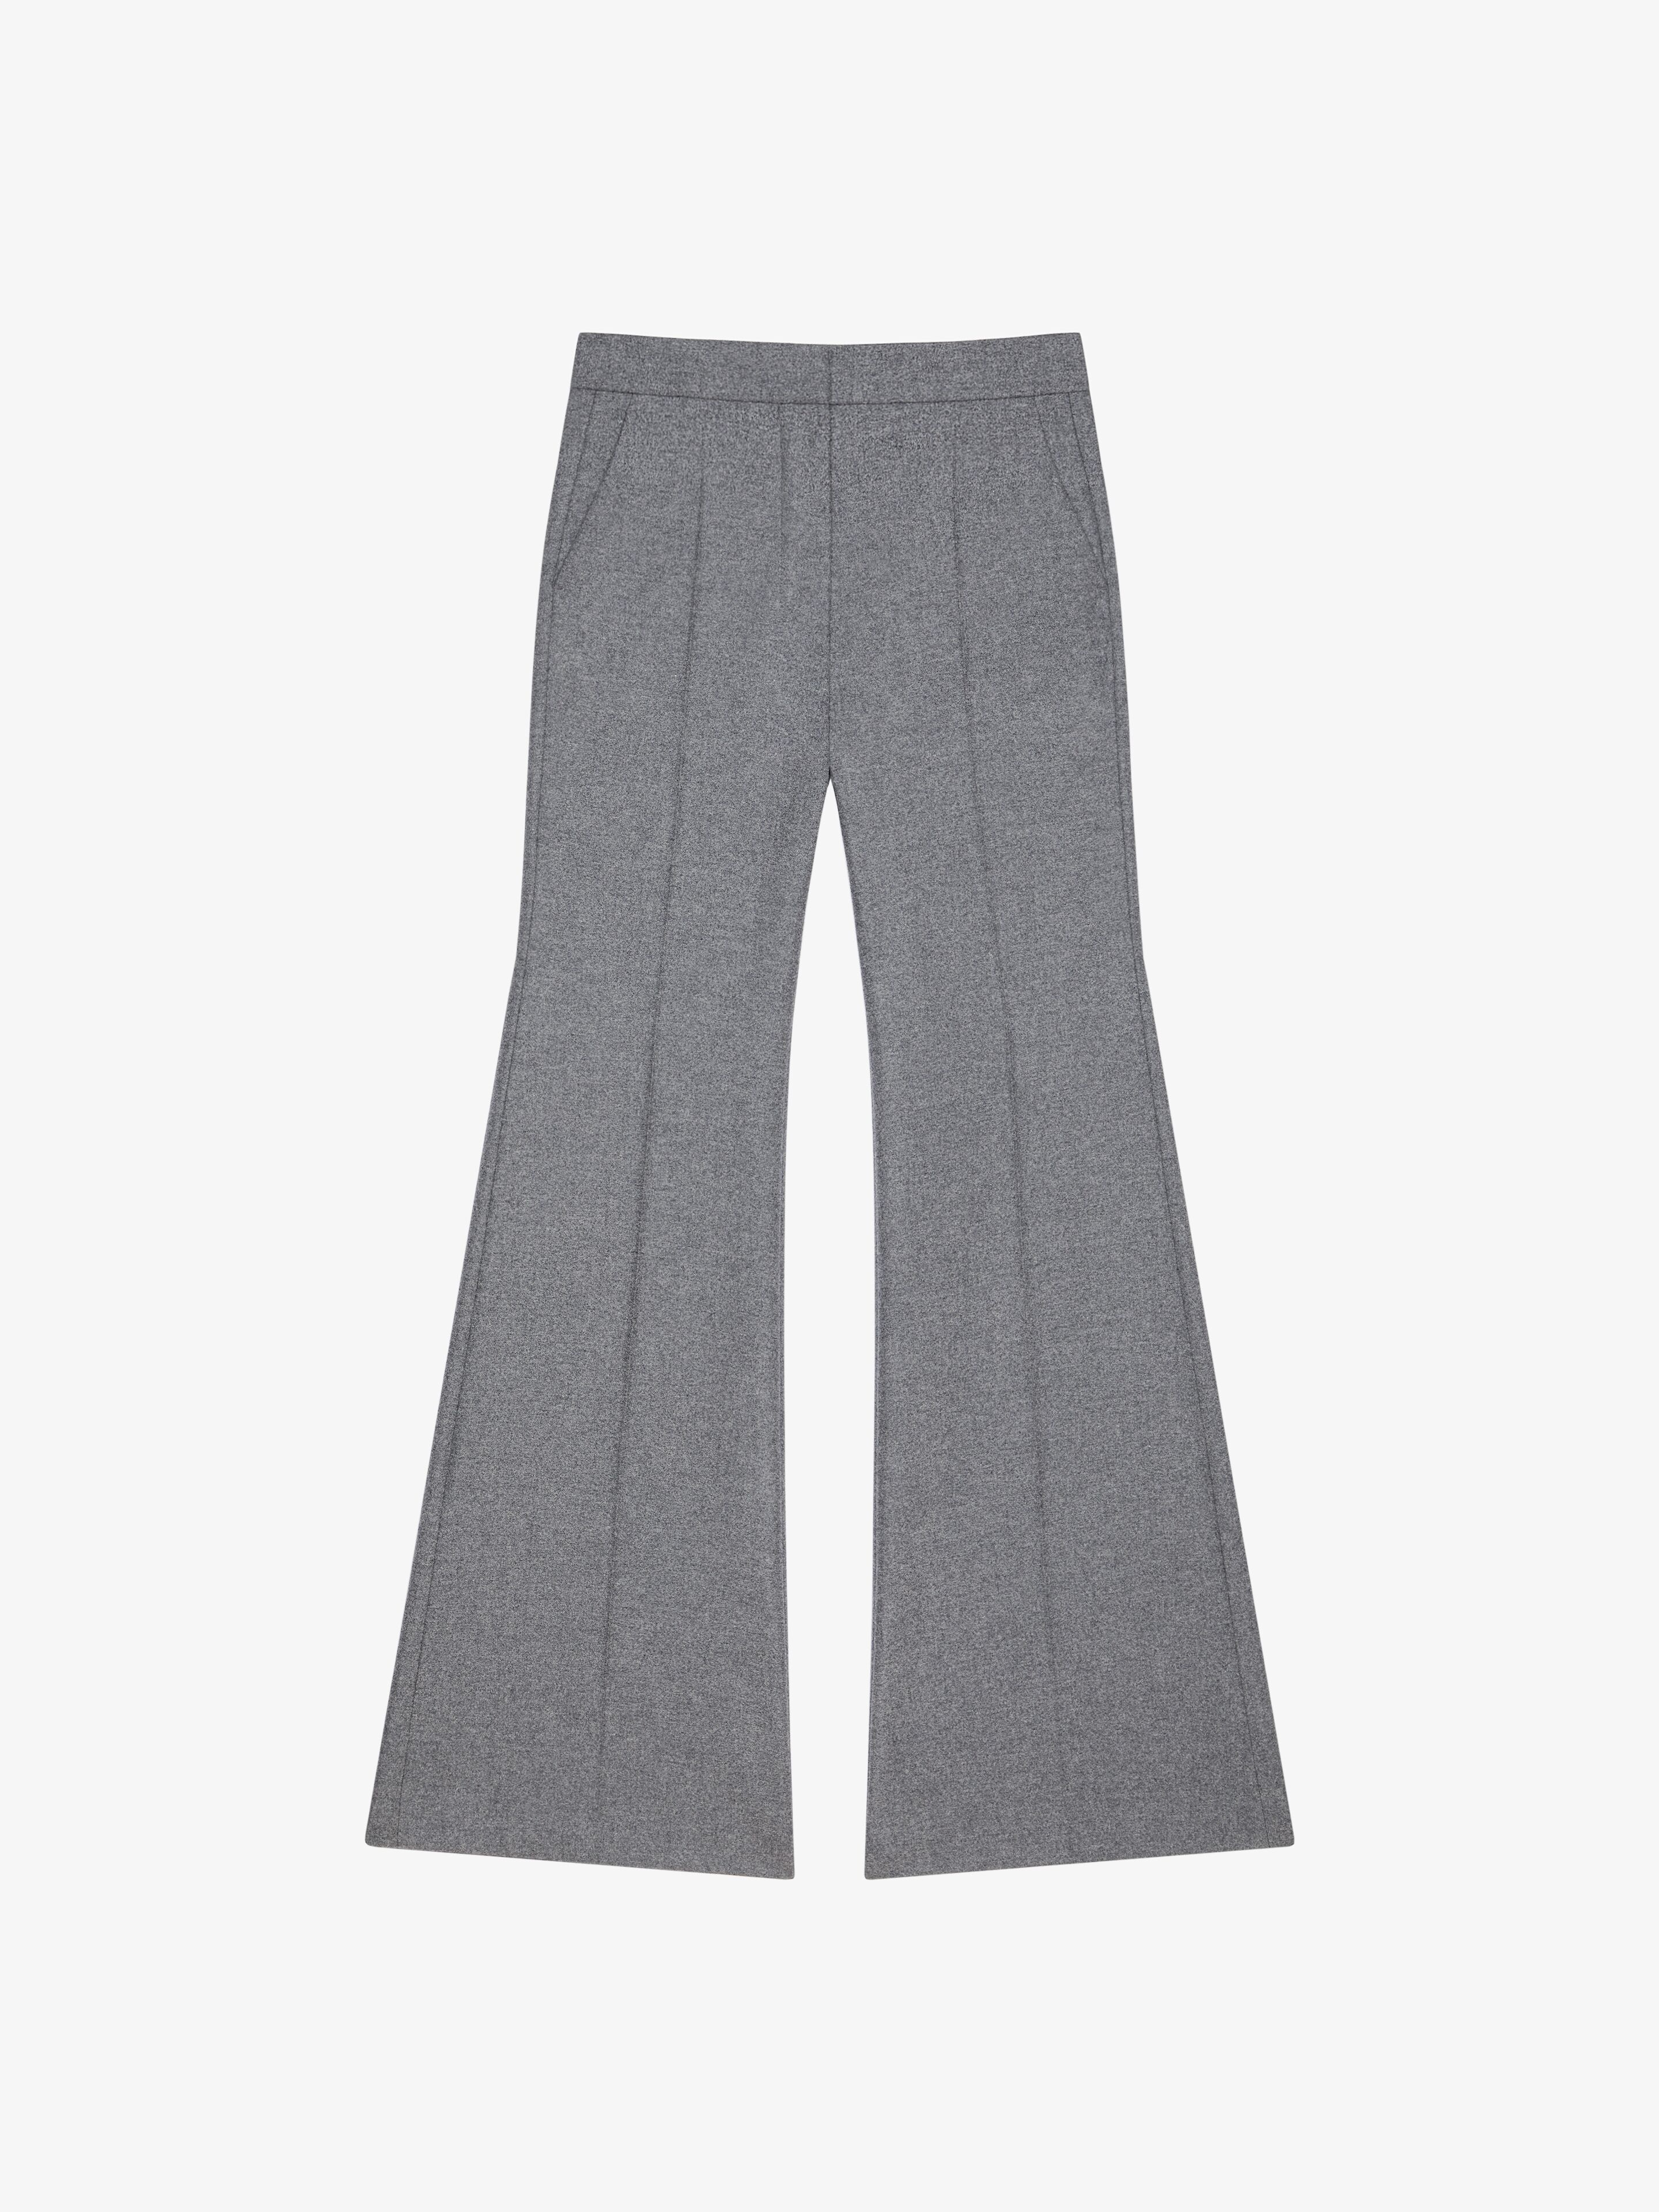 FLARE TAILORED PANTS IN WOOL FLANNEL - 1